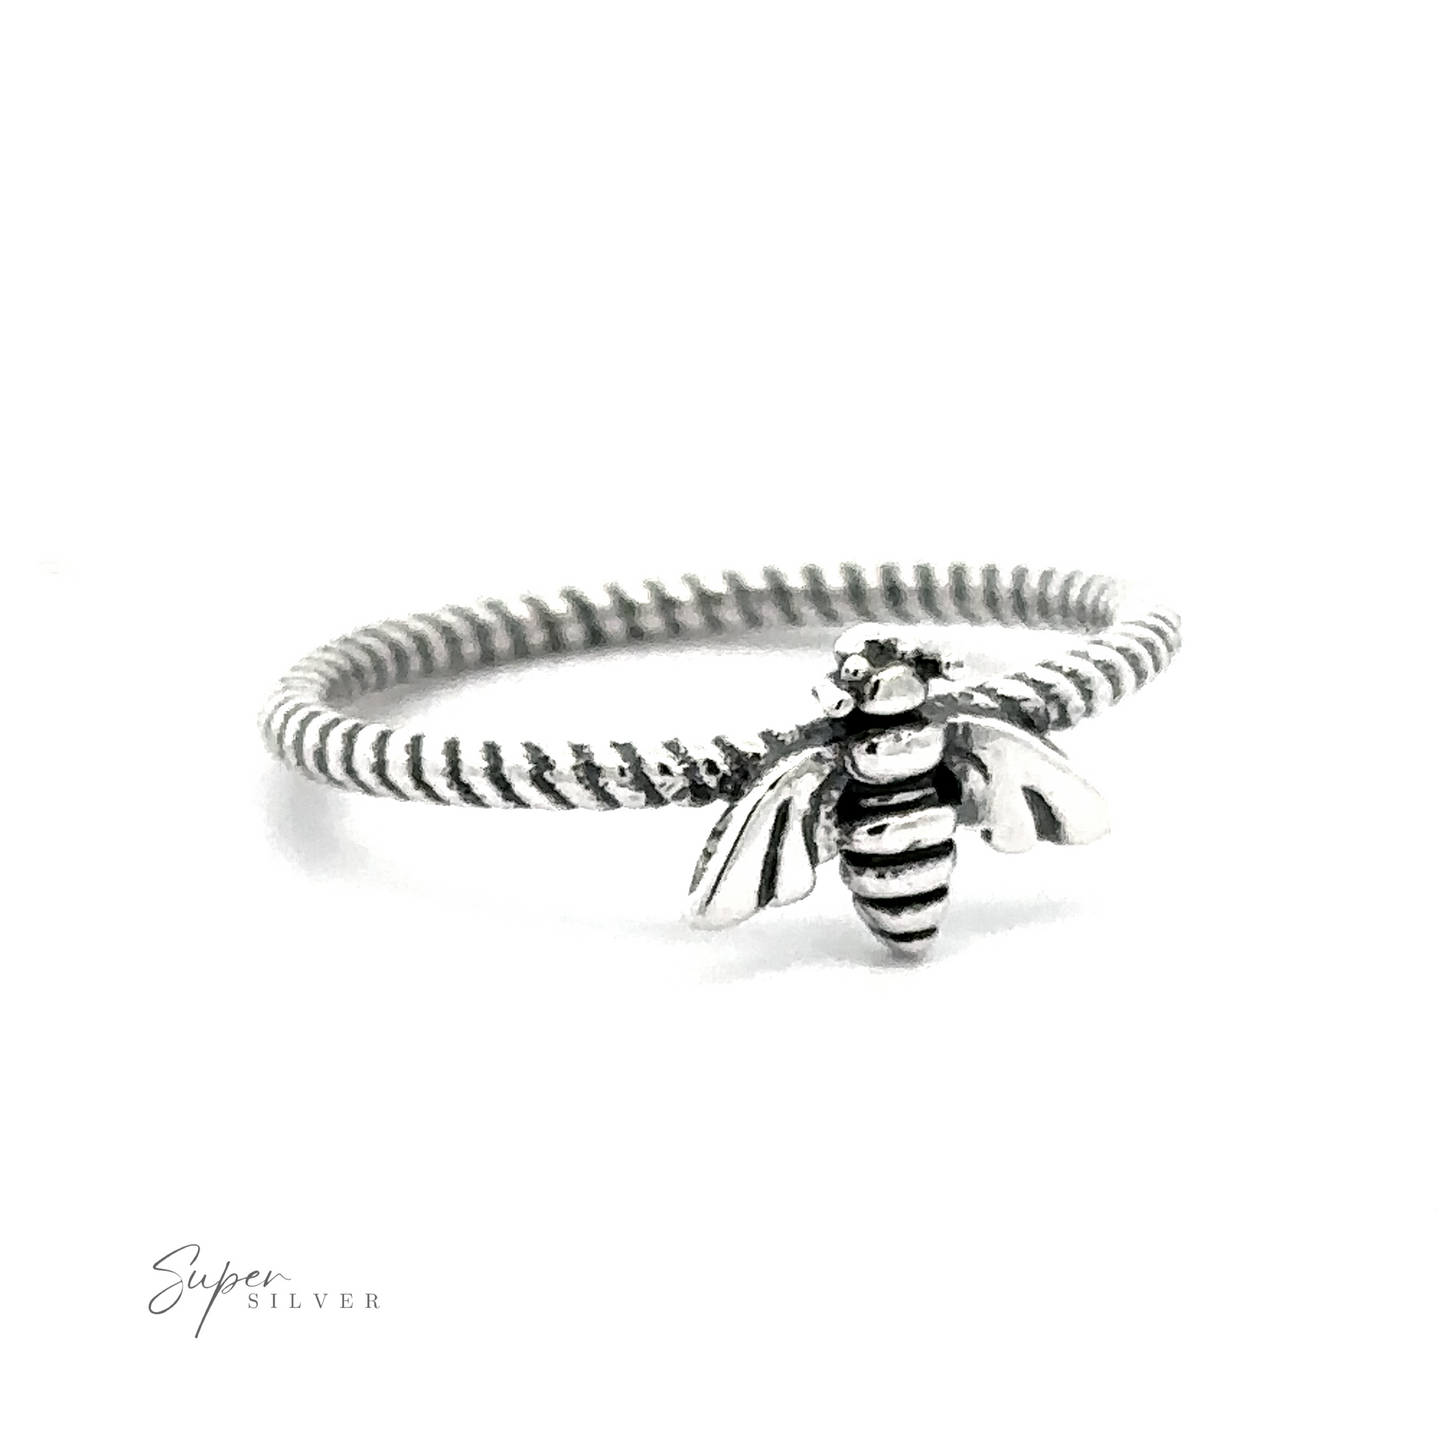 A silver Bee Ring with Twisted Band with a patina finish on a white background.